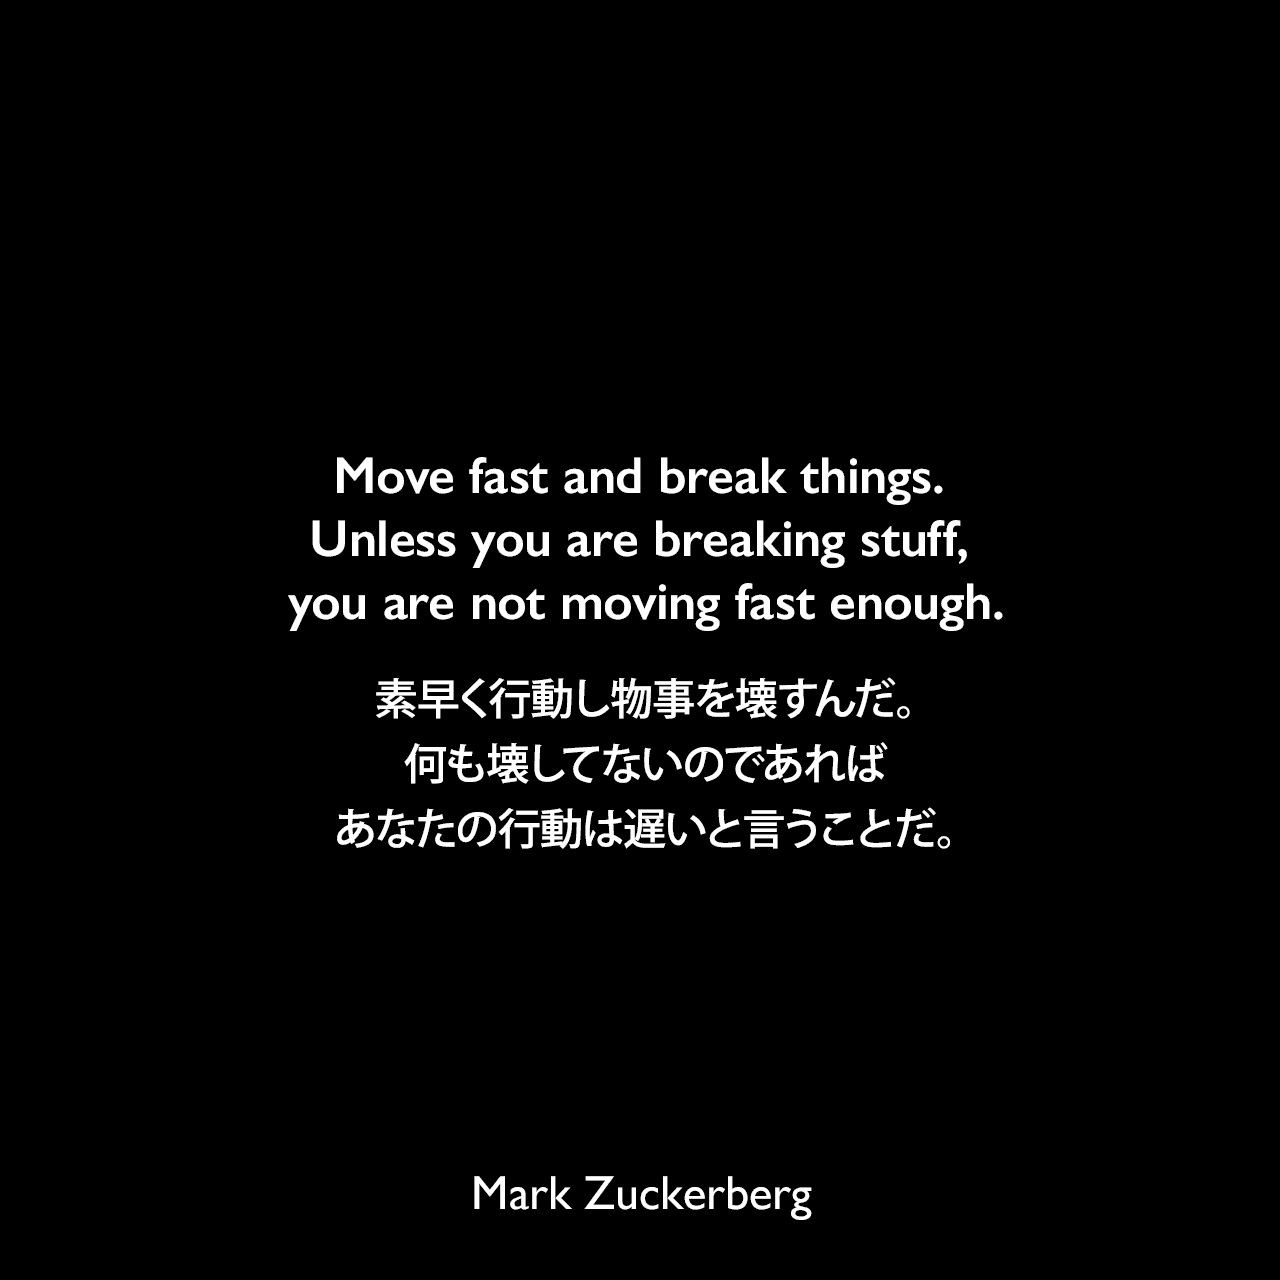 Move fast and break things. Unless you are breaking stuff, you are not moving fast enough.素早く行動し物事を壊すんだ。何も壊してないのであればあなたの行動は遅いと言うことだ。Mark Zuckerberg